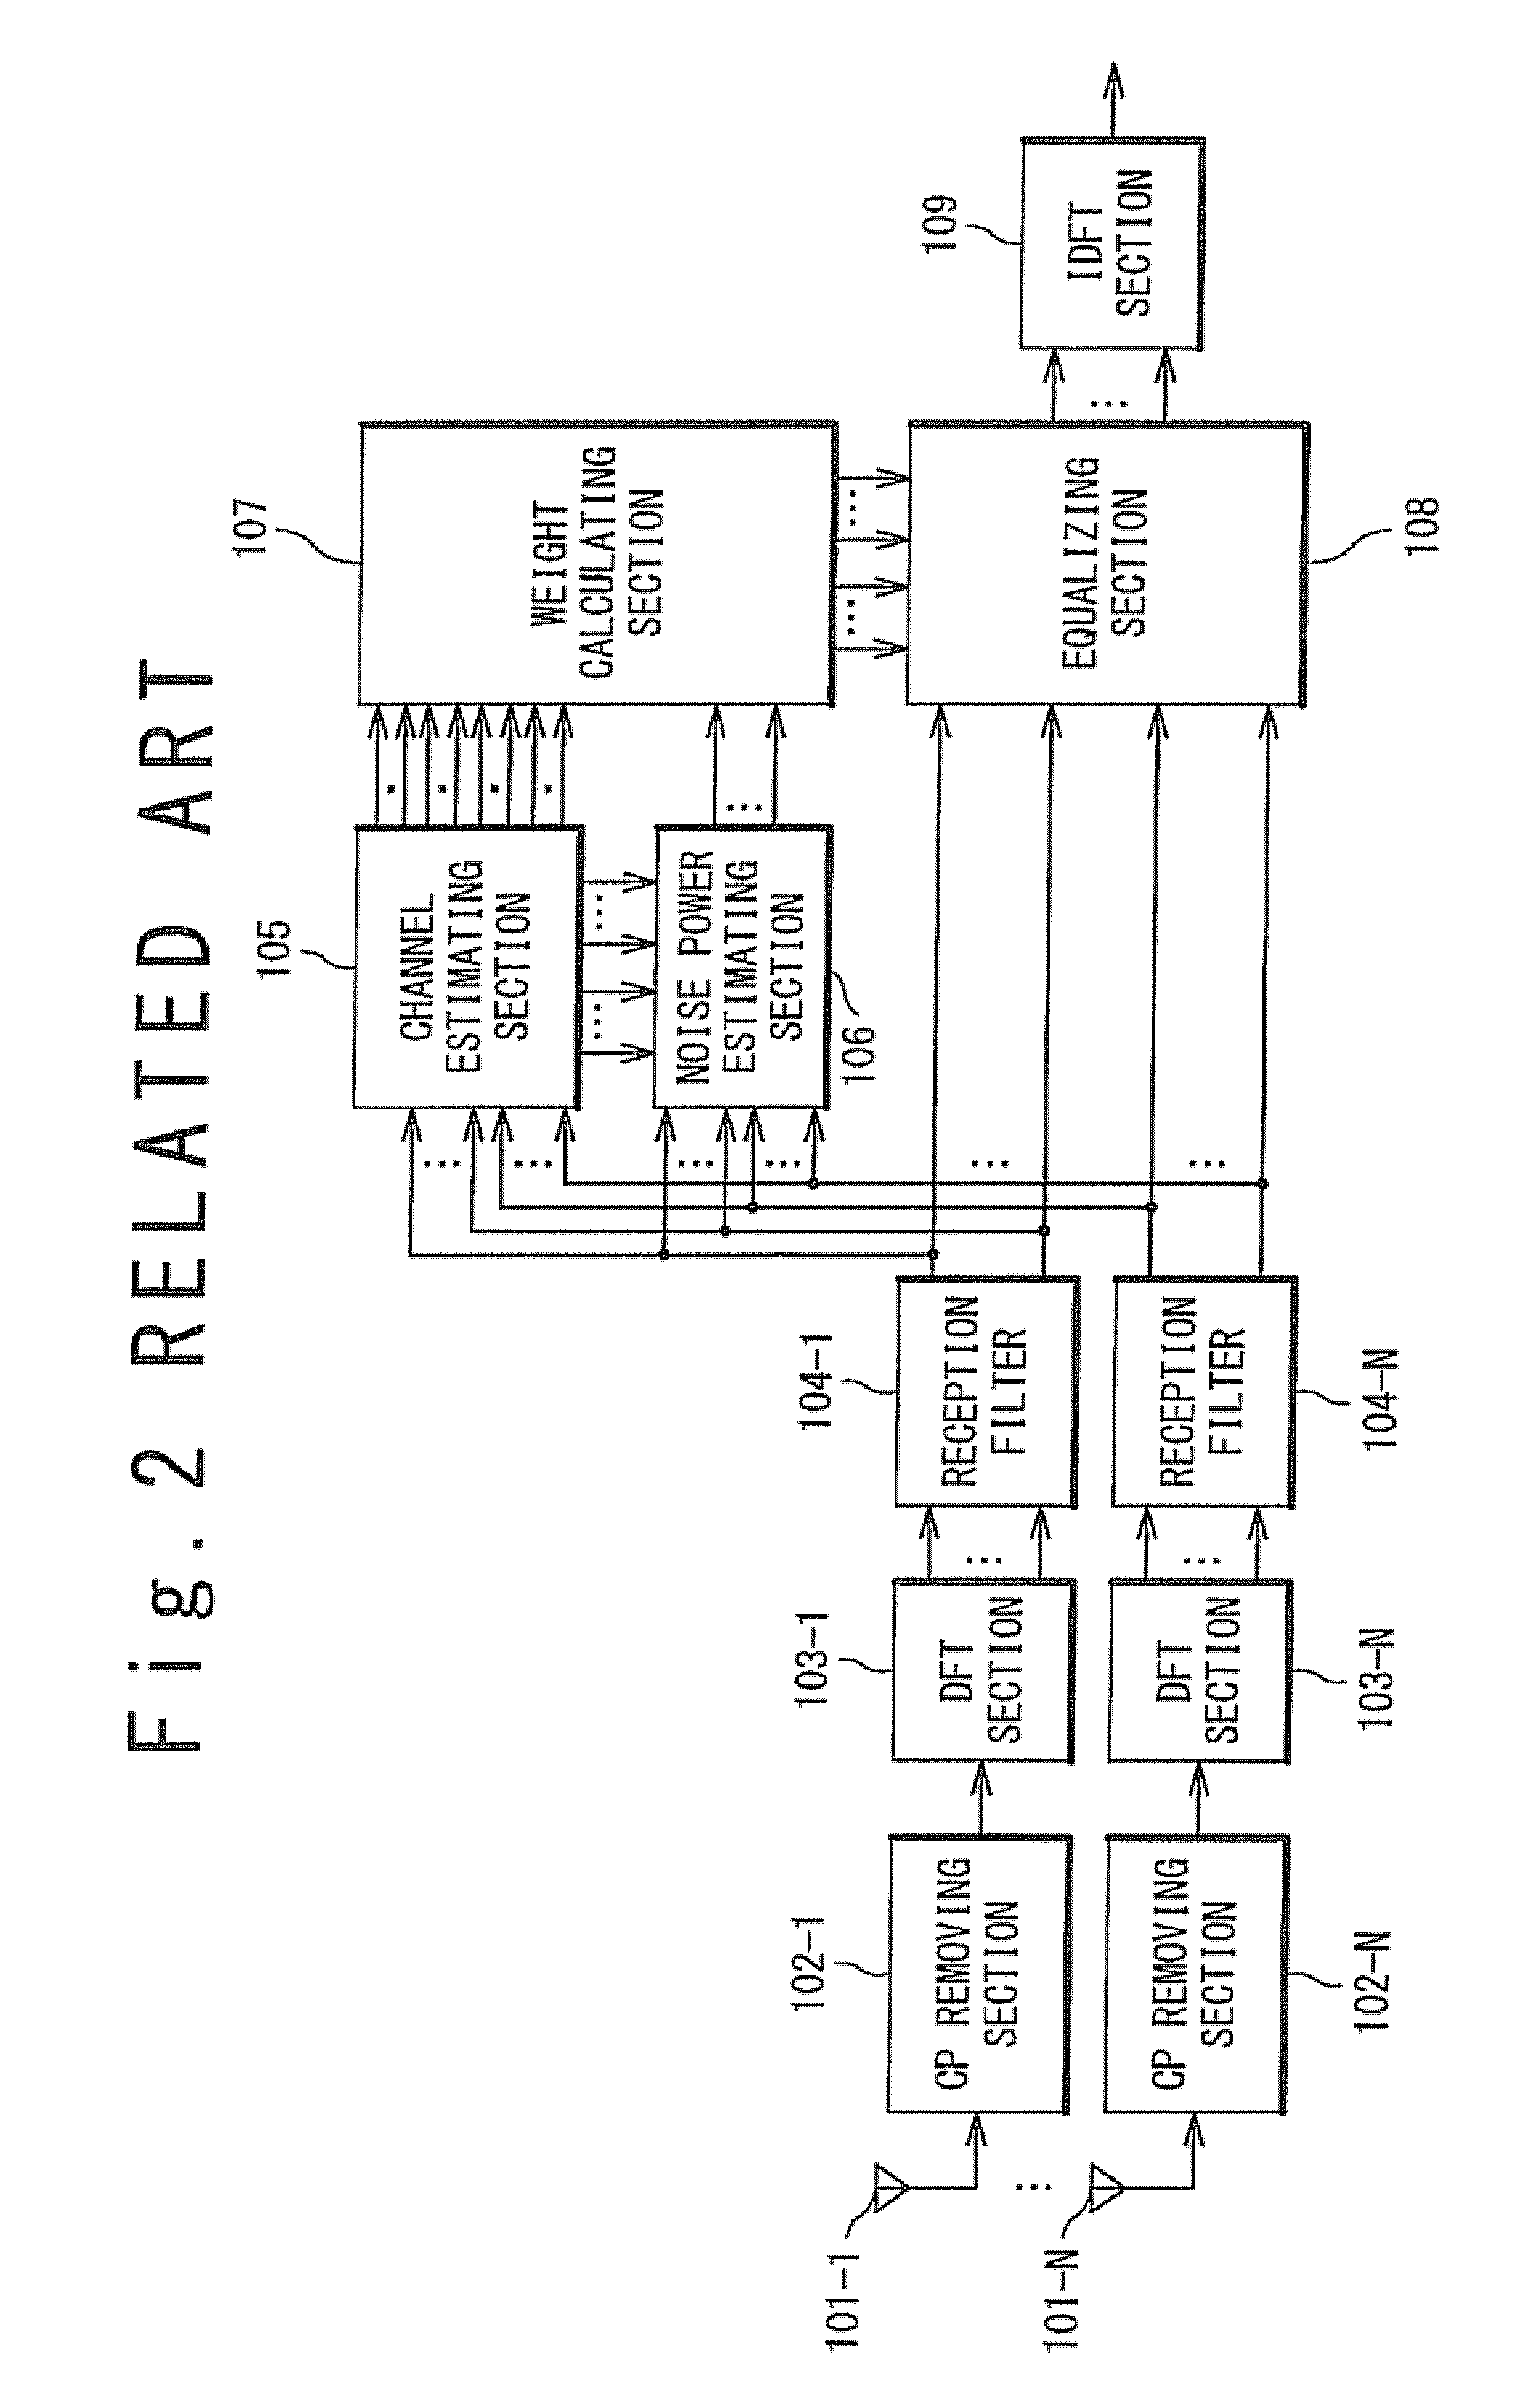 Receiving apparatus and mobile communication system